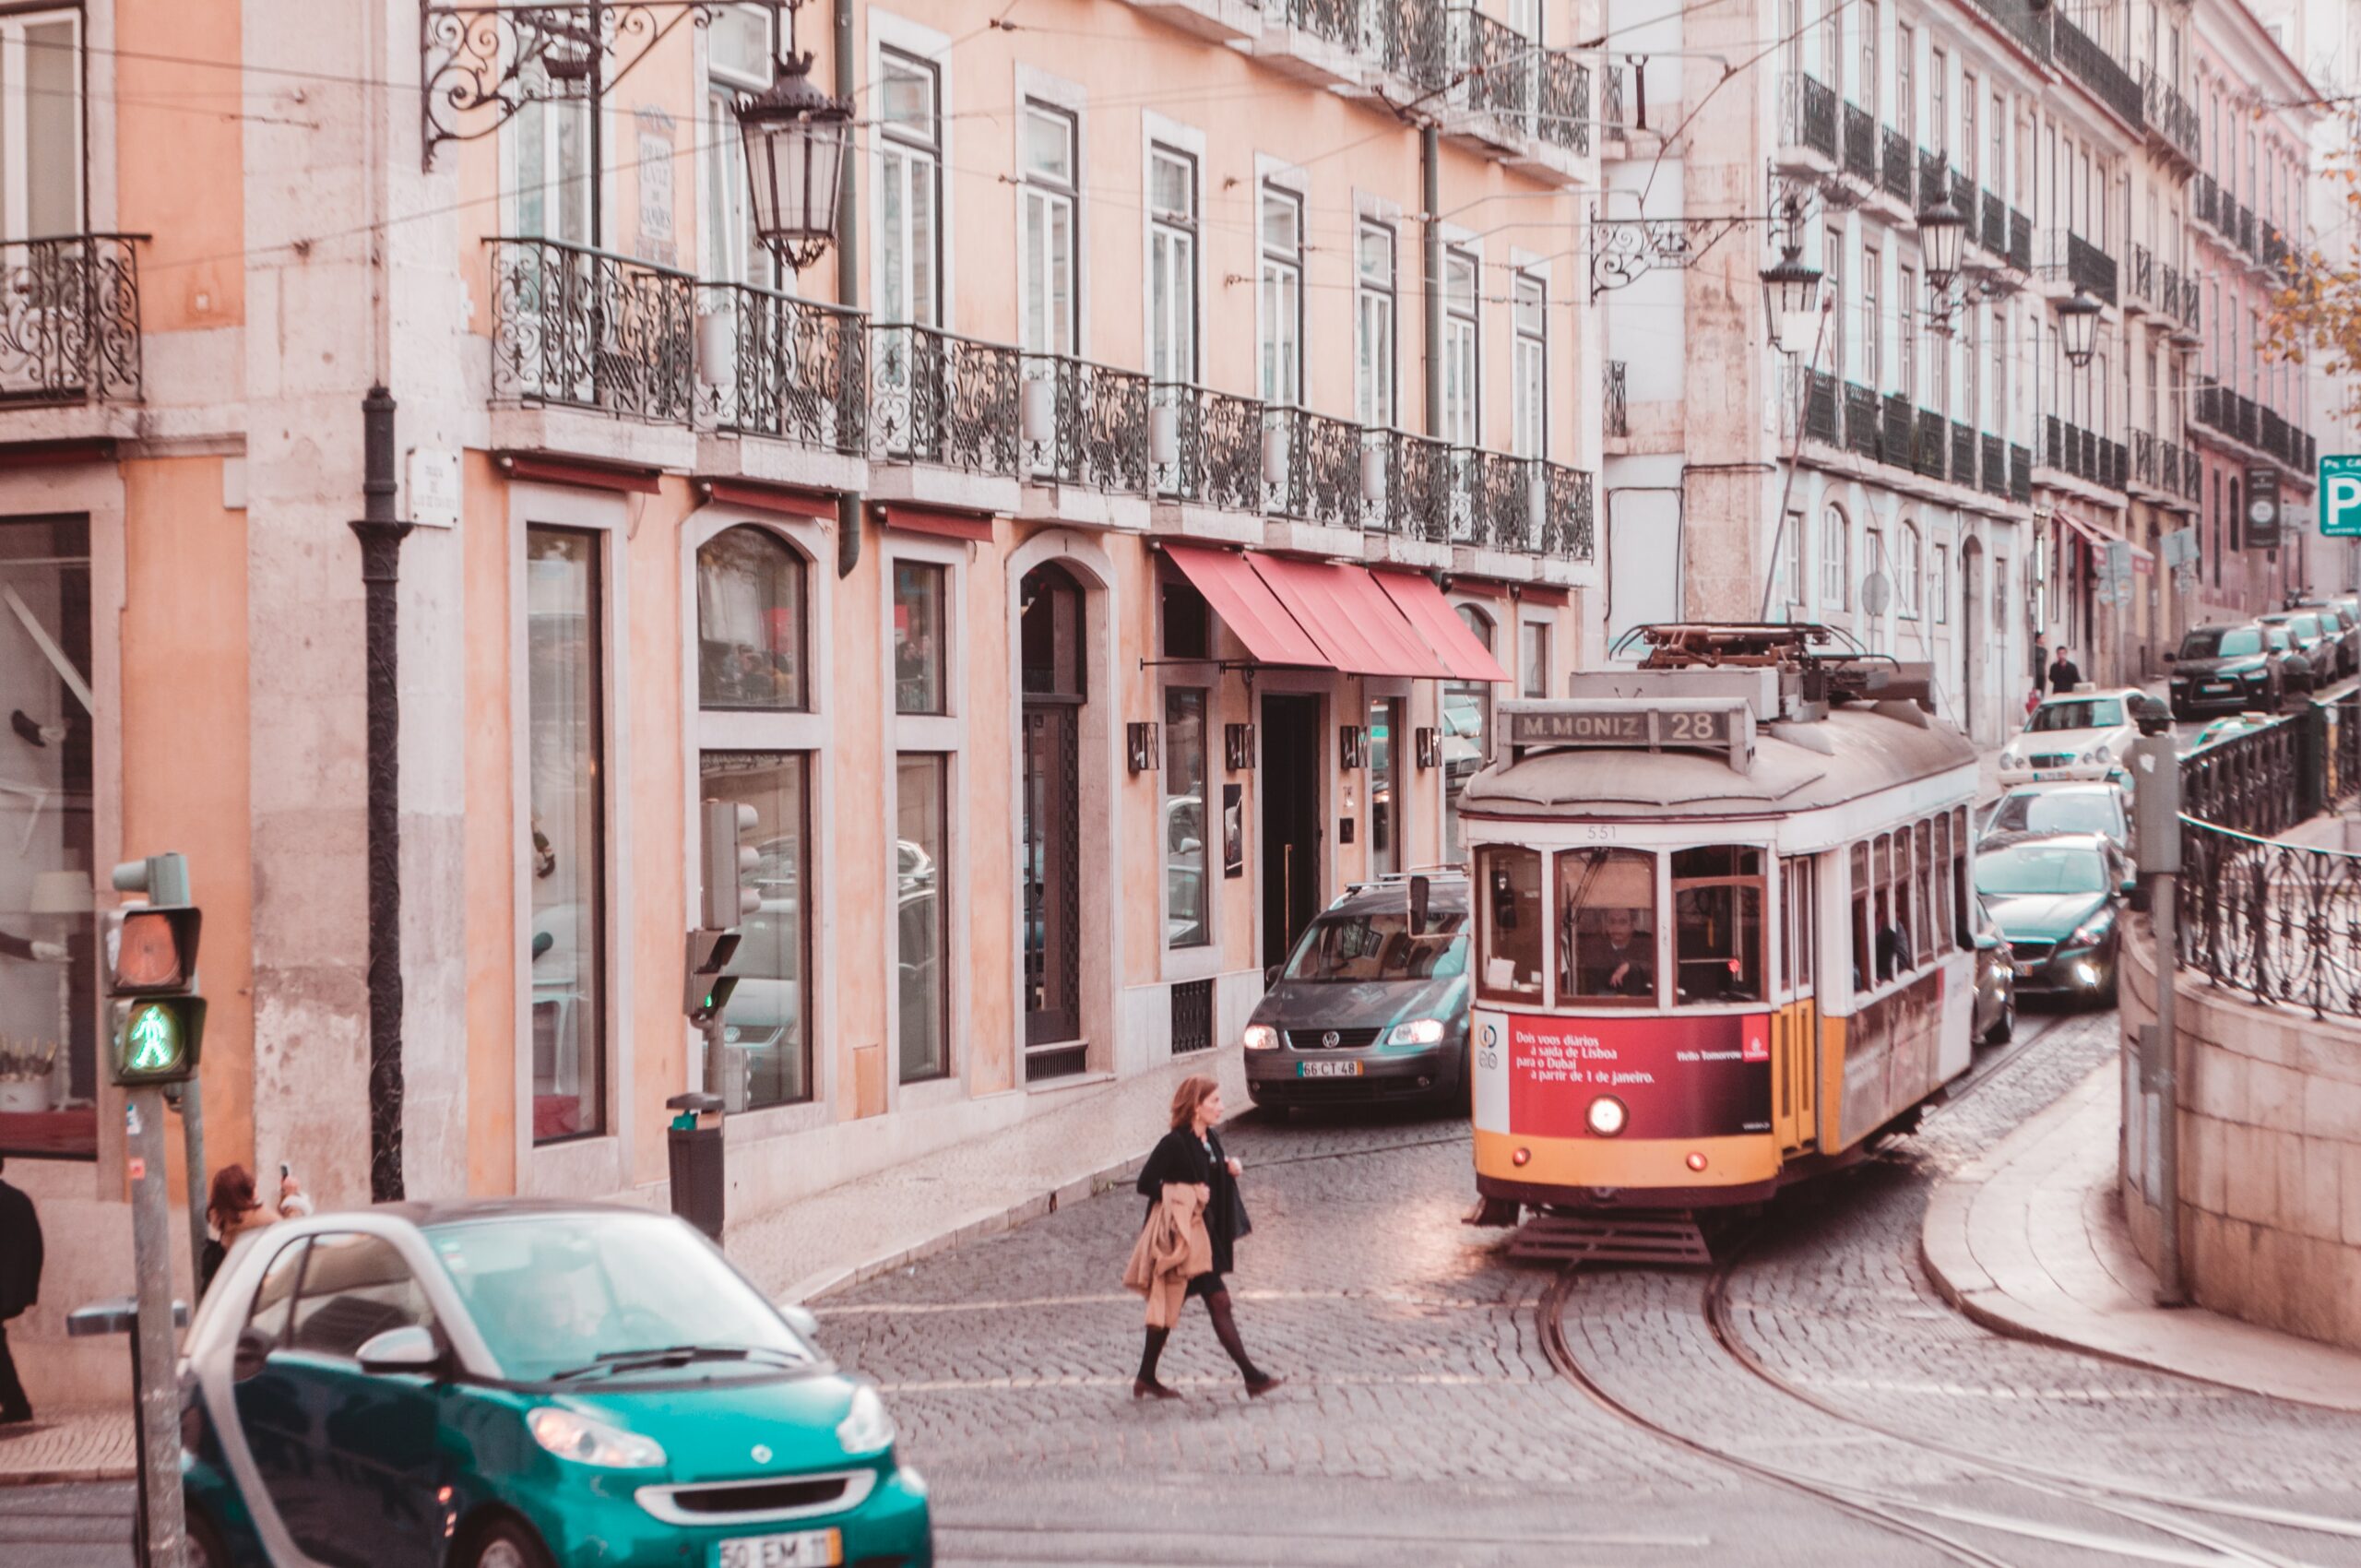 A tram and a lady walking in Lisbon